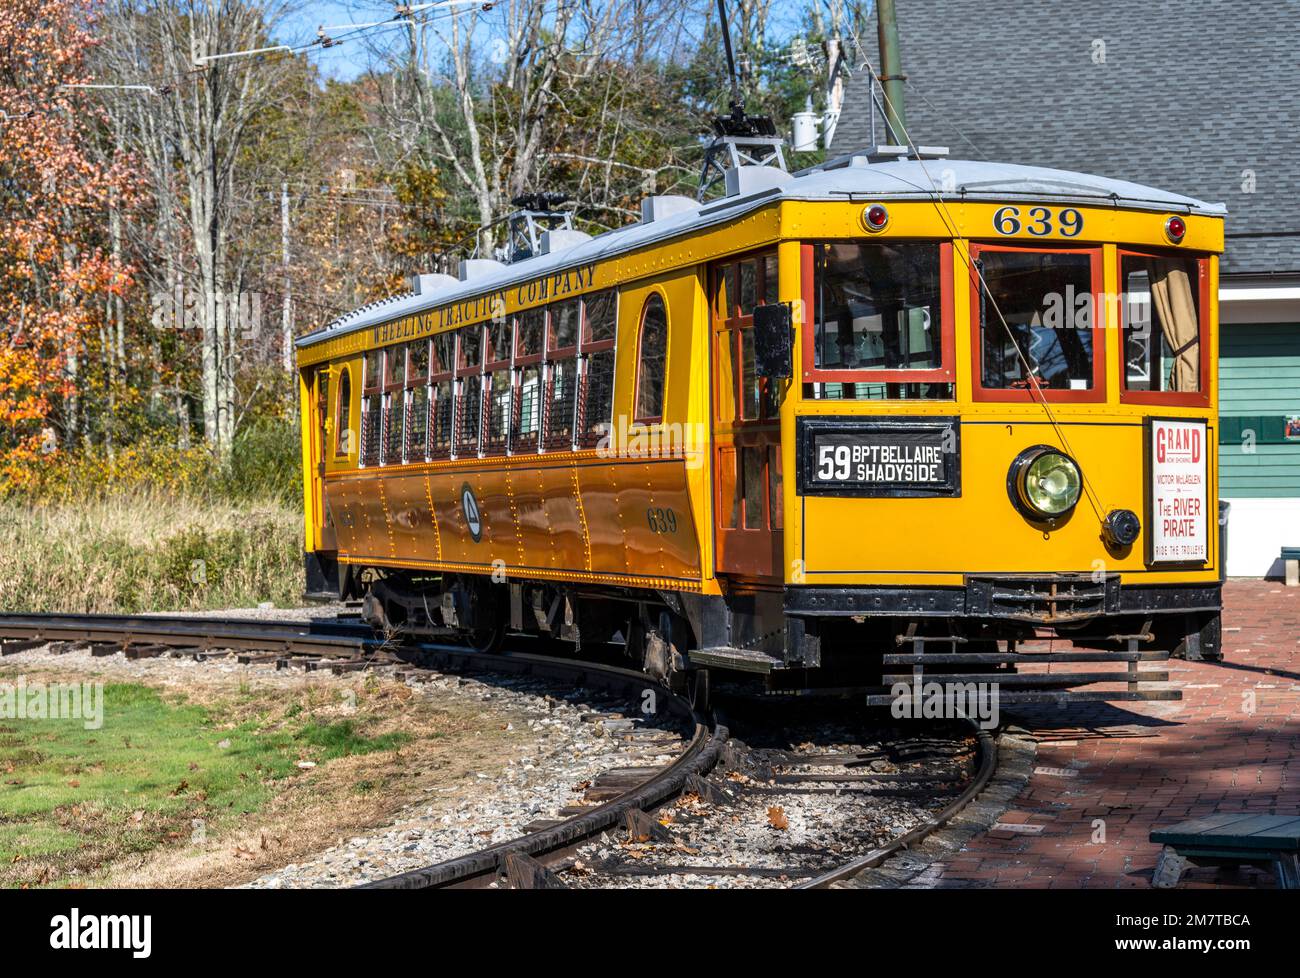 outside view of No 639 trolley car used to take visitors for a ride at the Seashore Trolley Museum Stock Photo